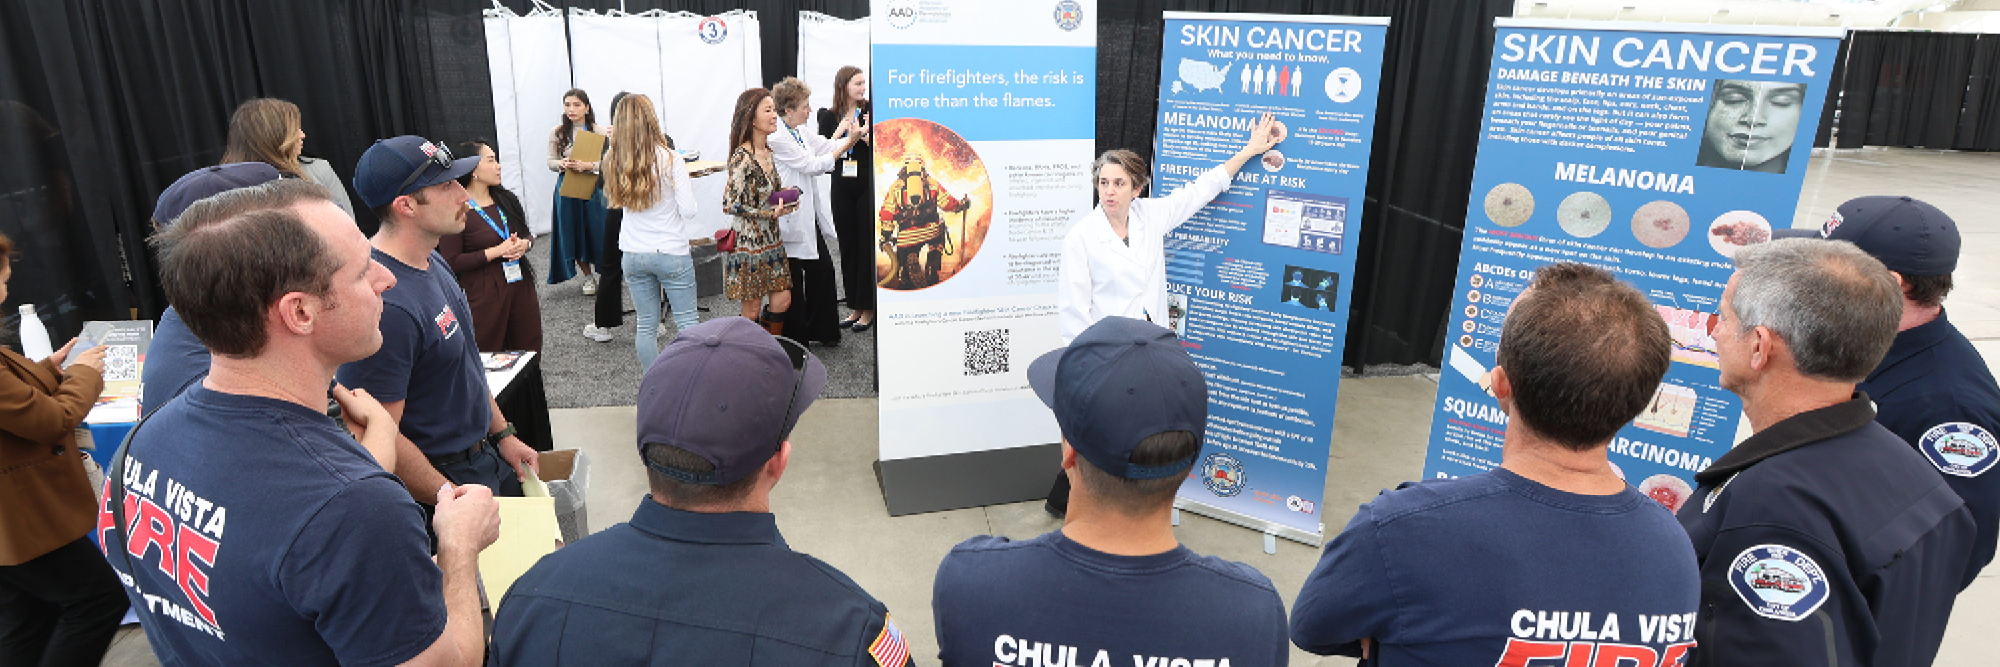 Image for Firefighter Skin Cancer Checks Program on a ladder to success